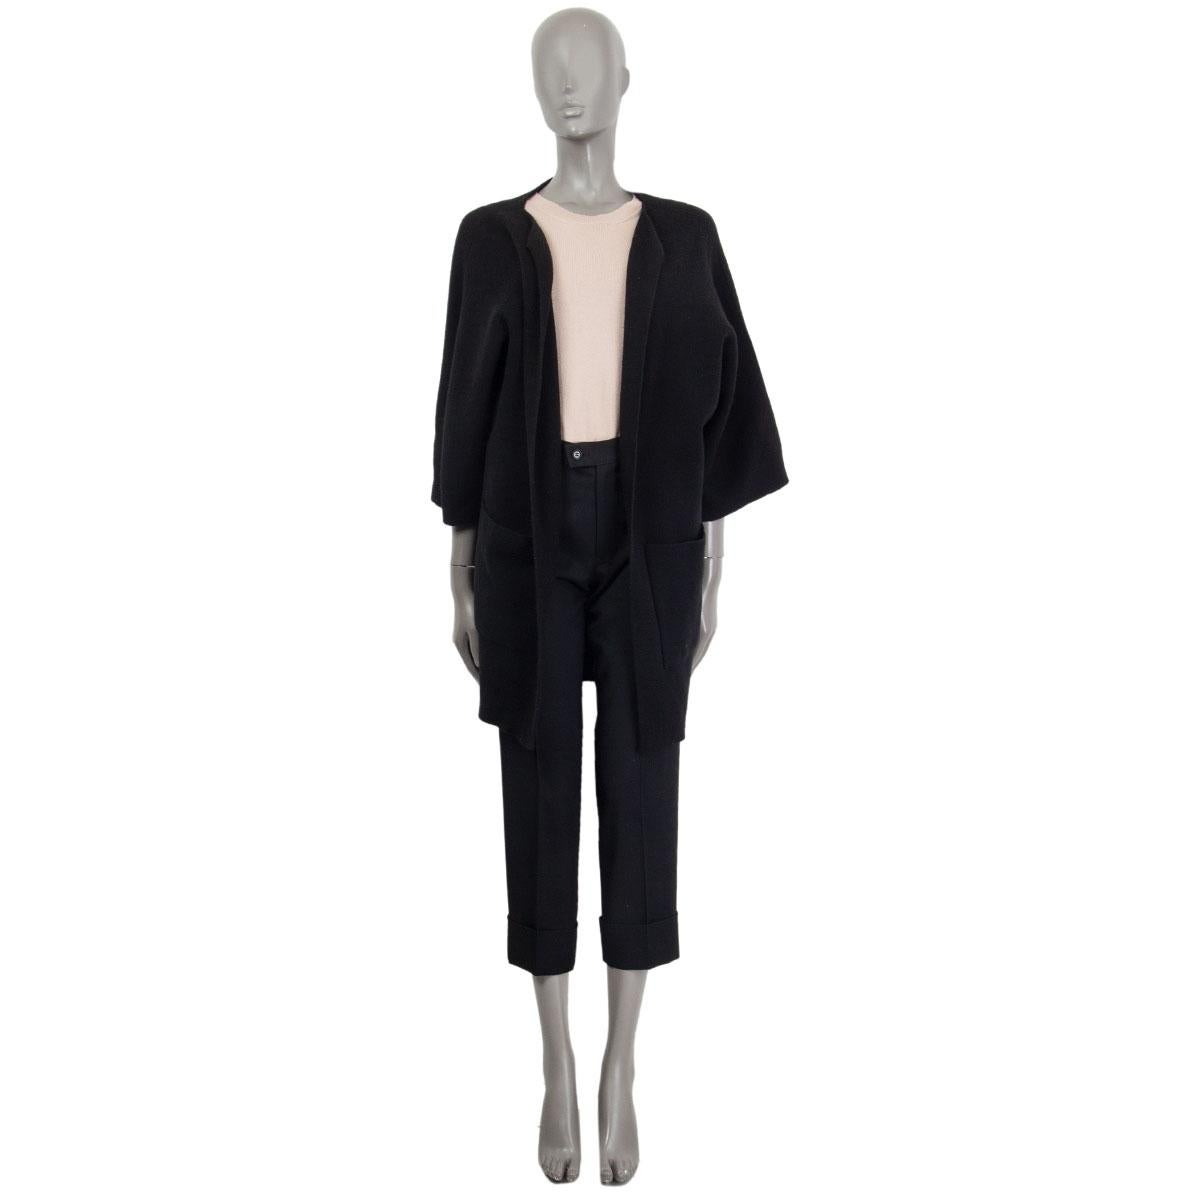 100% authentic Jil Sander oversized open cardigan with wide 3/4 raglan sleeves and two patch pockets at front in black cashmere (95%) and elastane (5%). Has been worn and is in excellent condition. 

Measurements
Tag Size	36
Size	S
Waist From	110cm